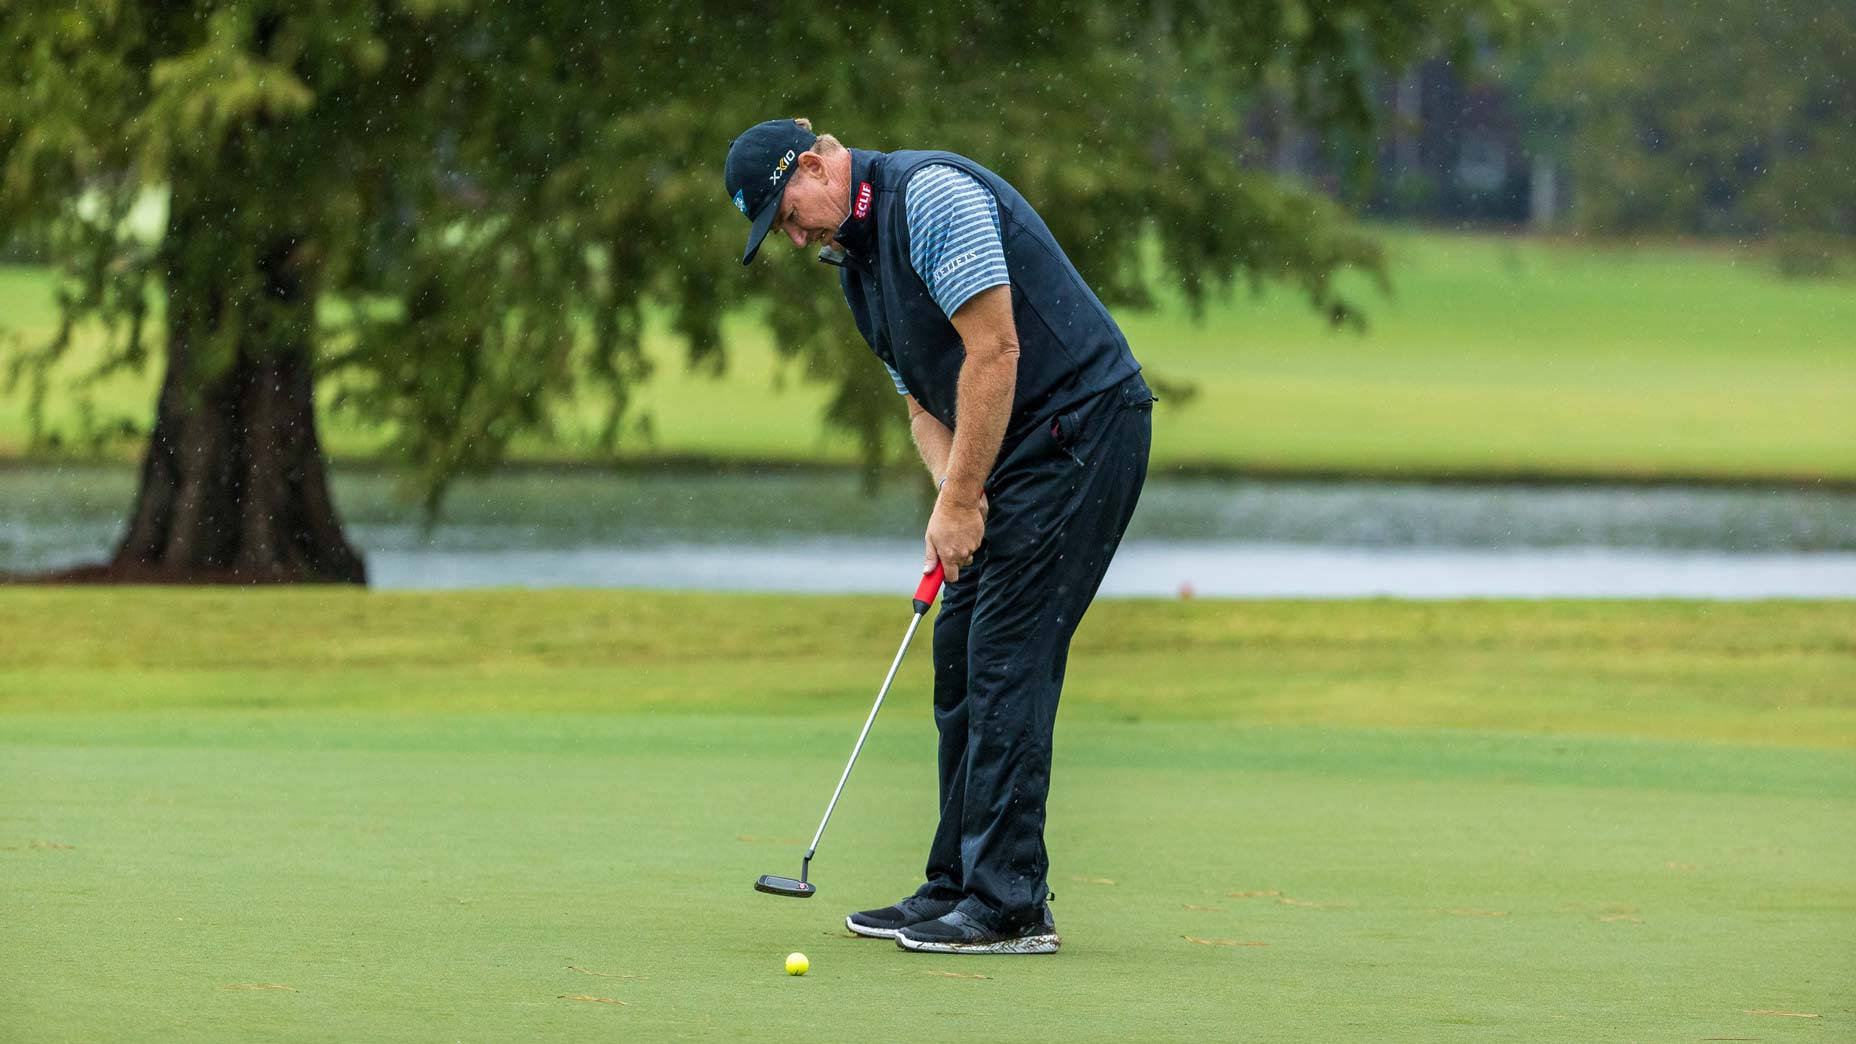 Ernie Els Intensely Focusing on His Swing on the Golf Course Wallpaper